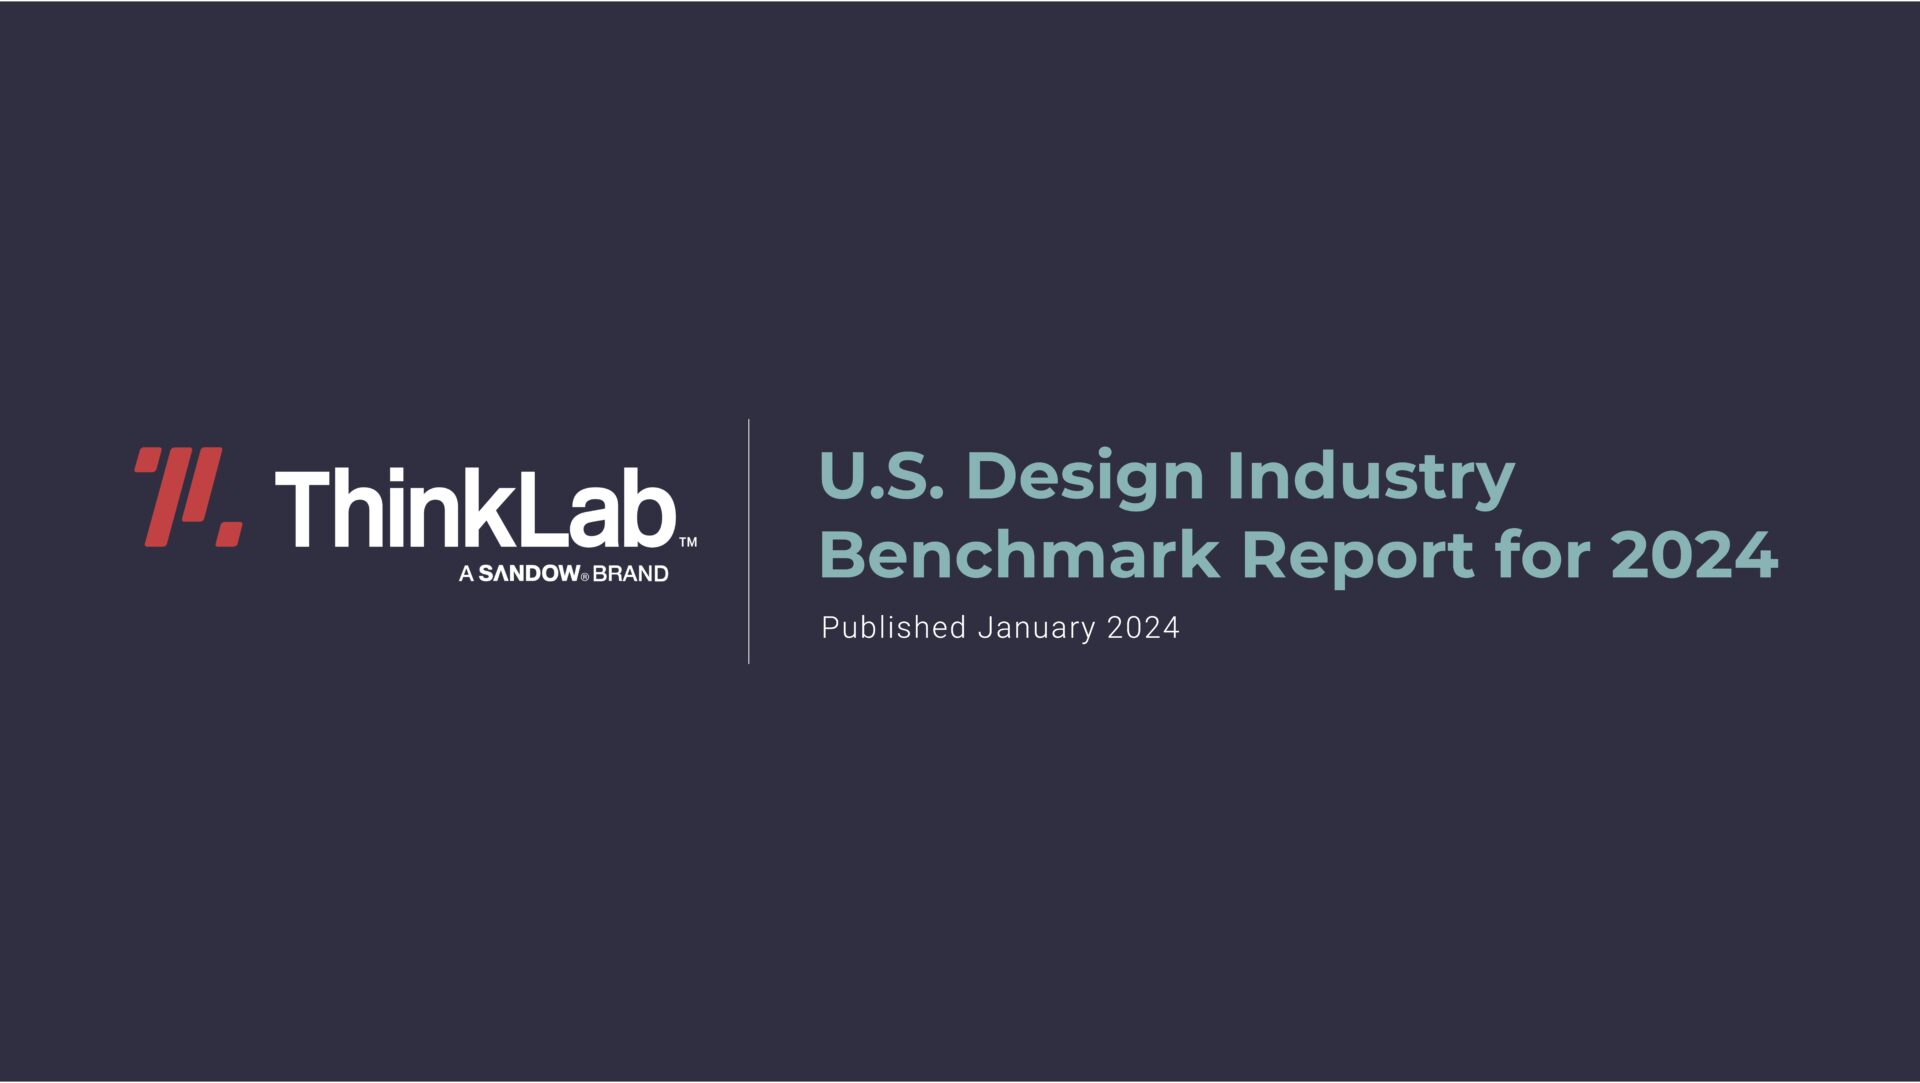 ThinkLab's US Design Industry Benchmark Report for 2024